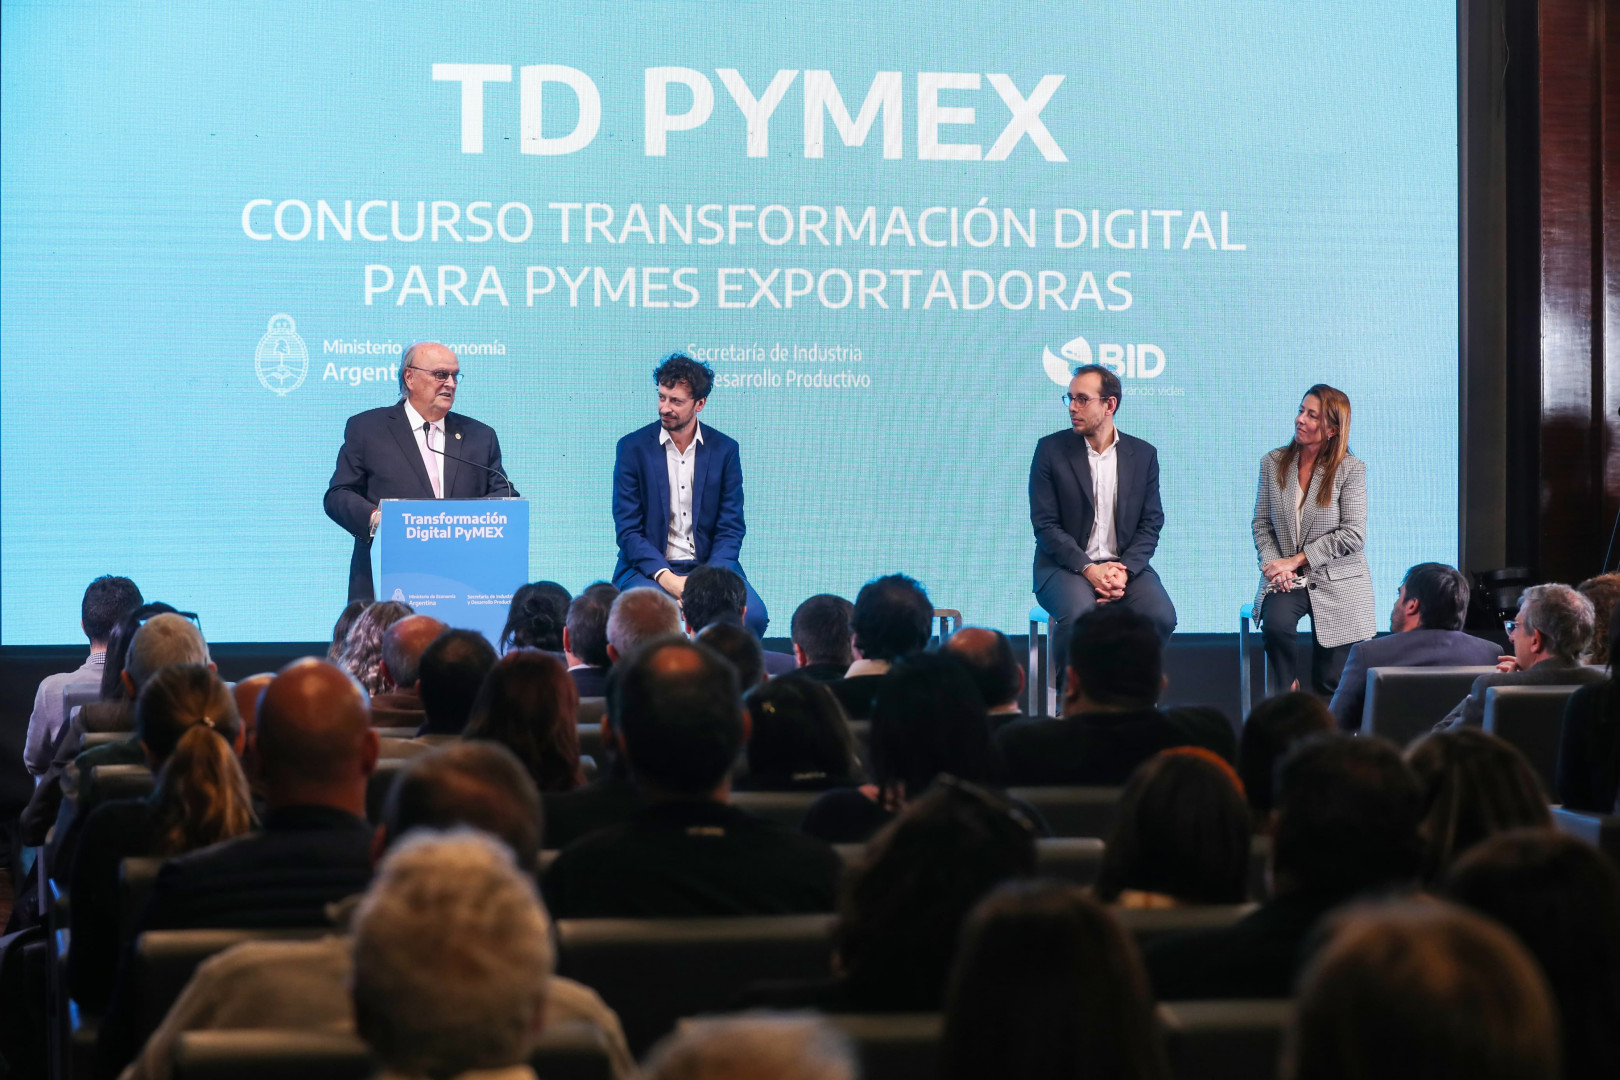 The economy encourages investments in the digital transformation of exporting SMEs